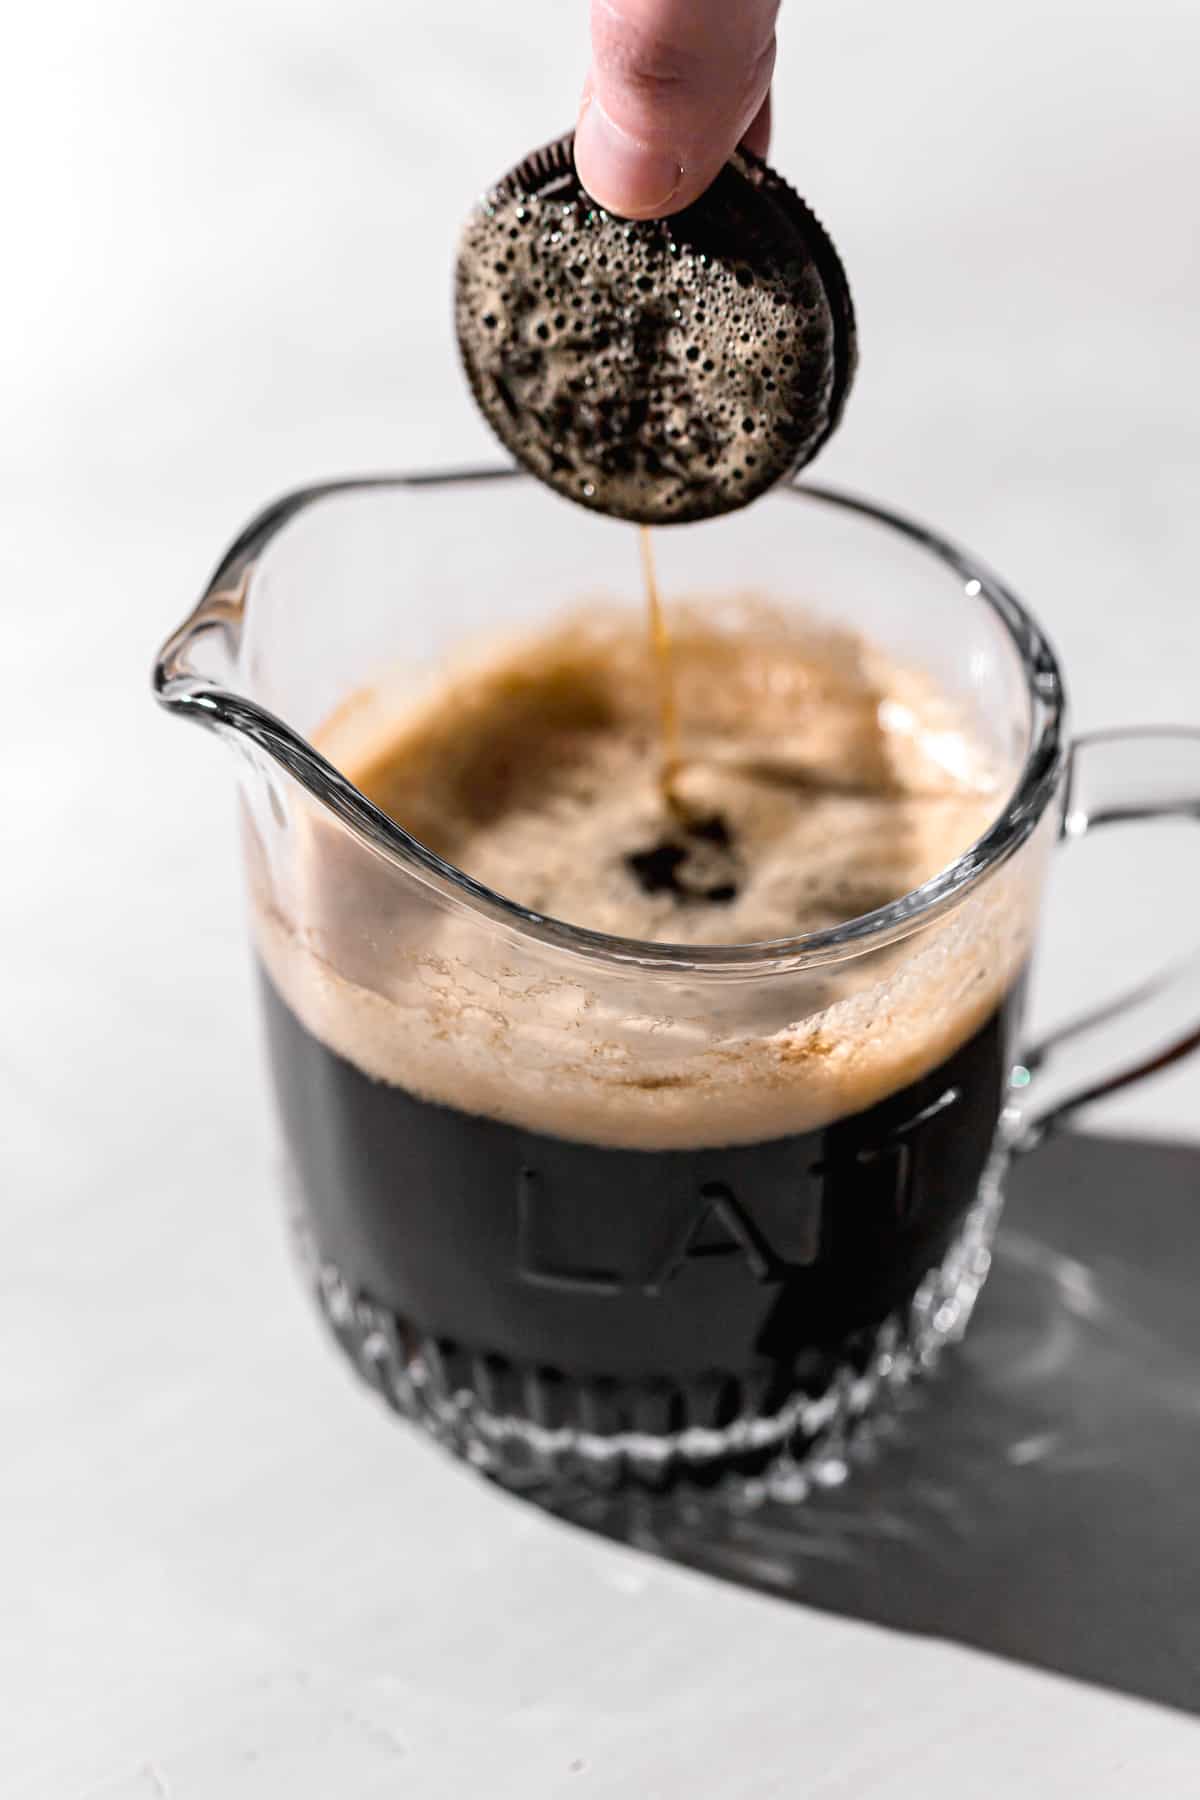 oreo being dipped in coffee.